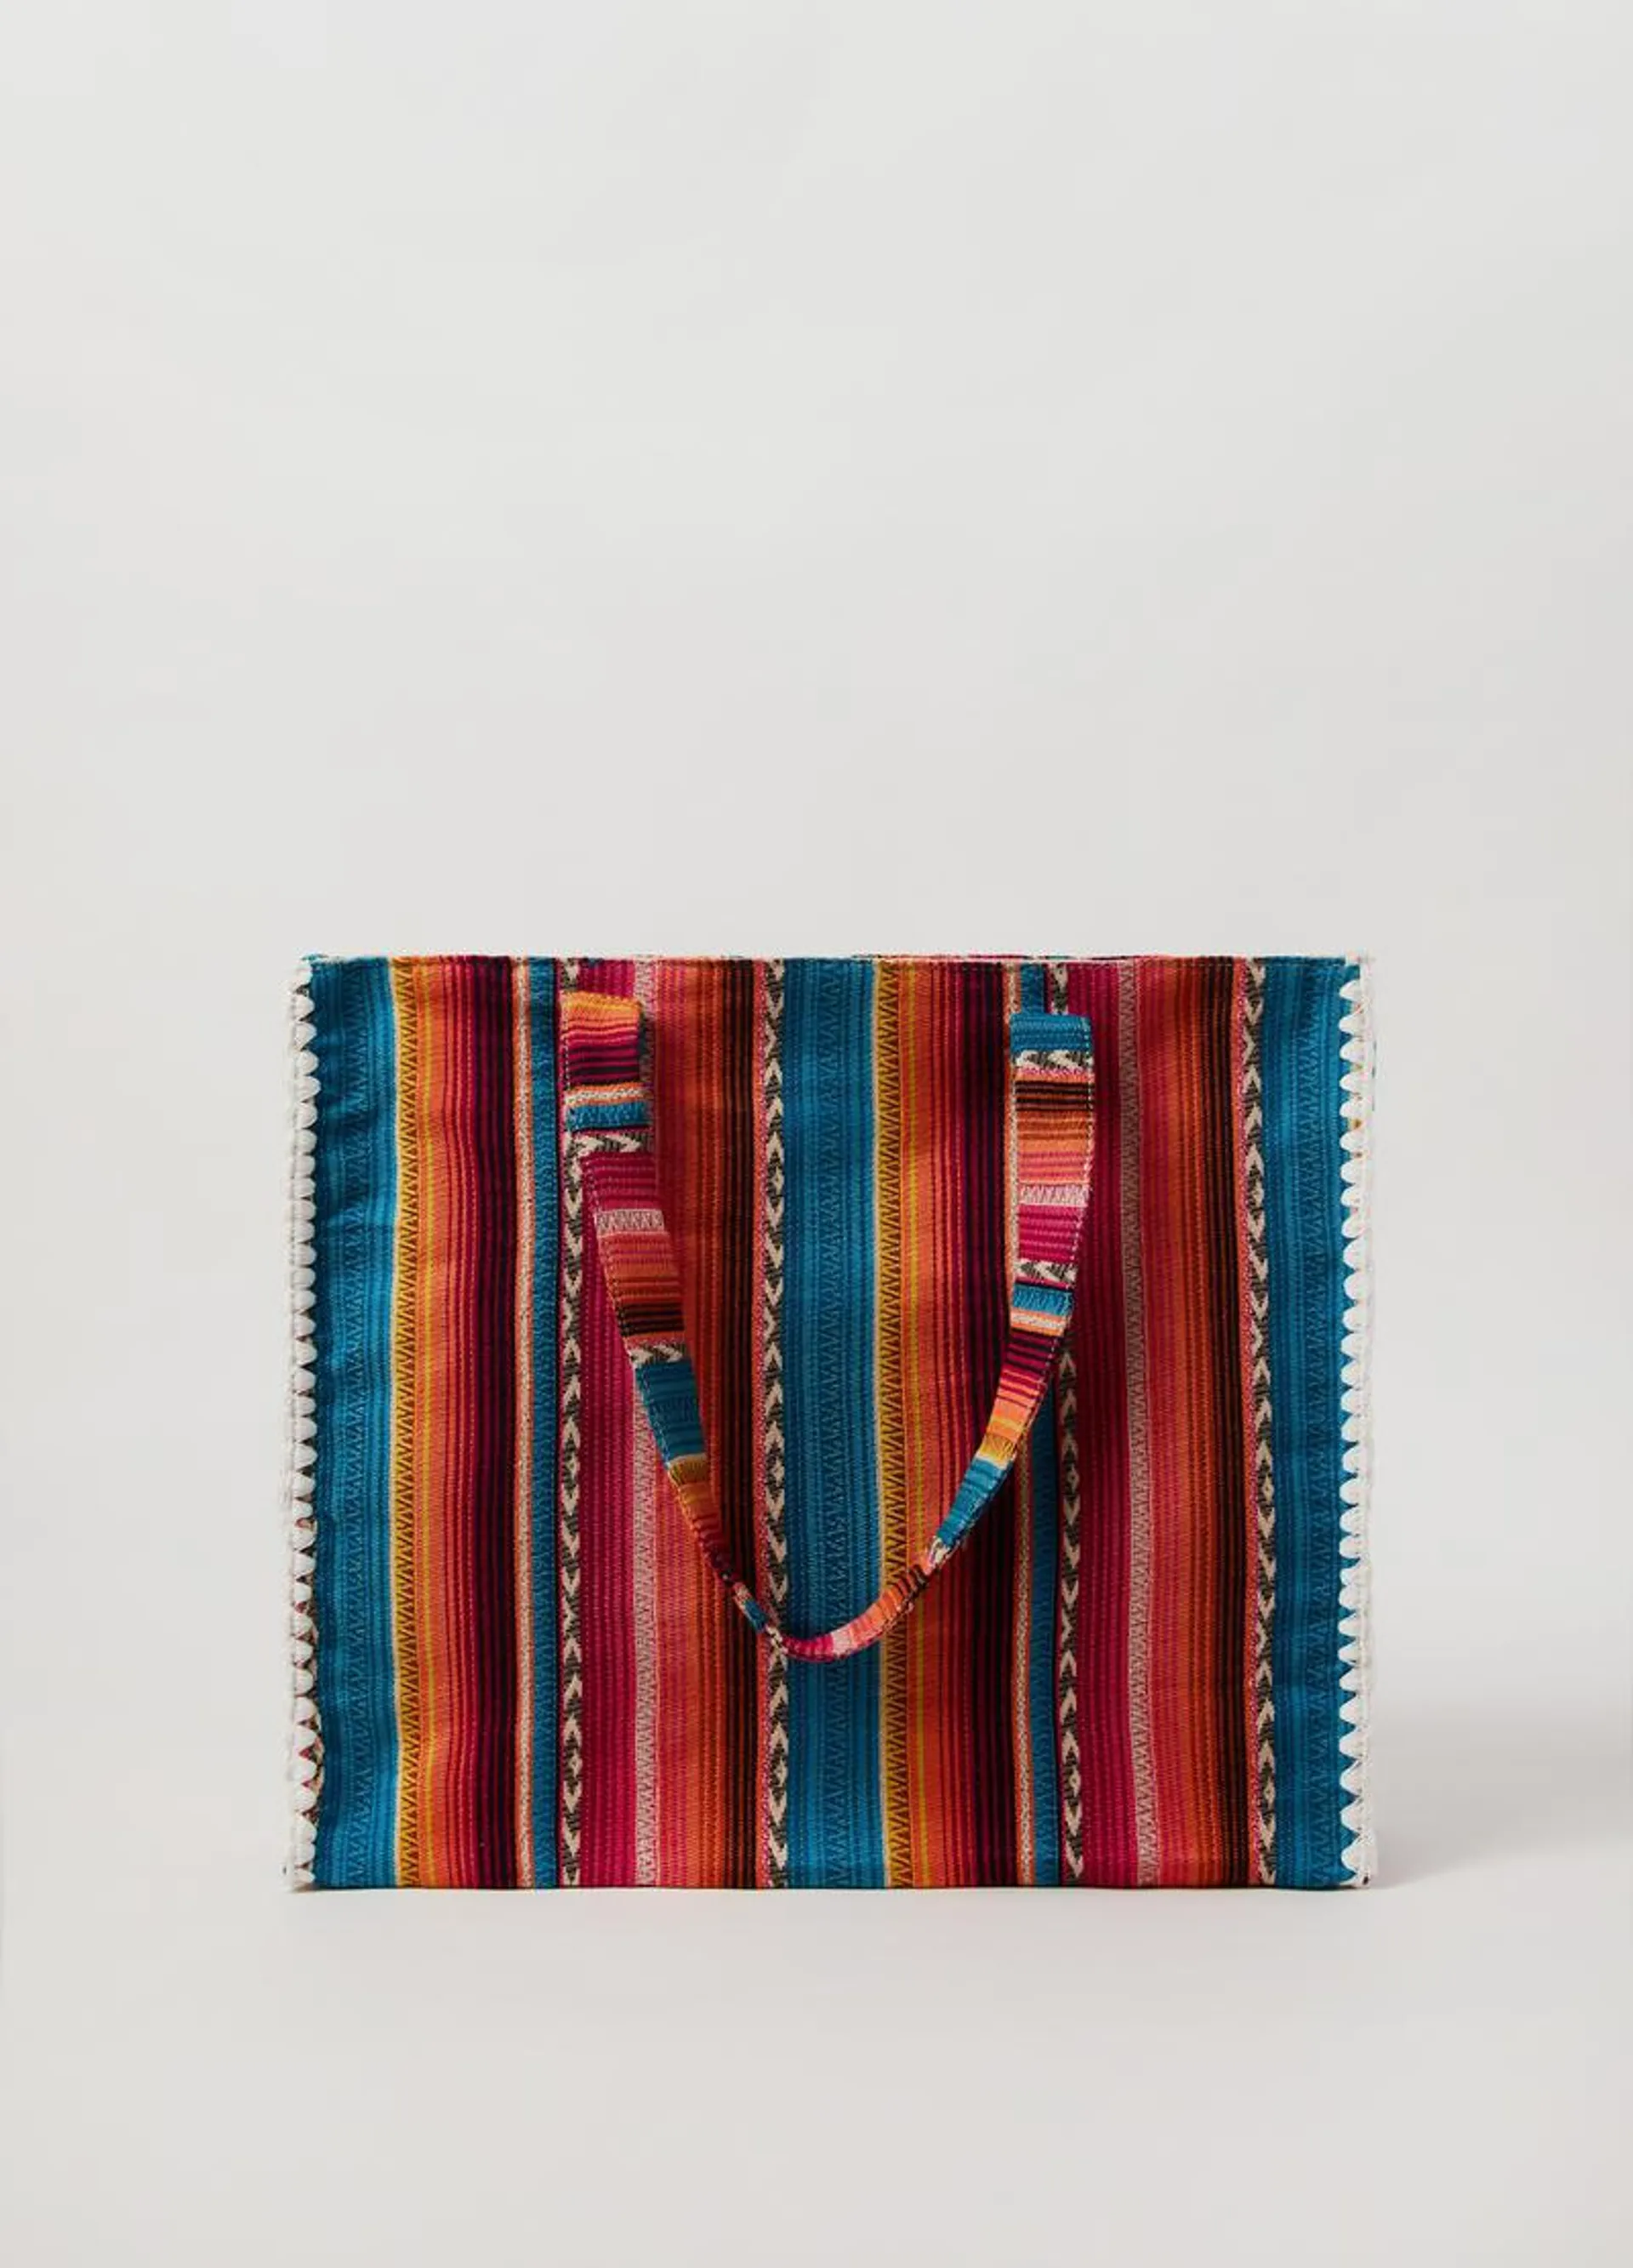 PIOMBO shopping bag with traditional pattern